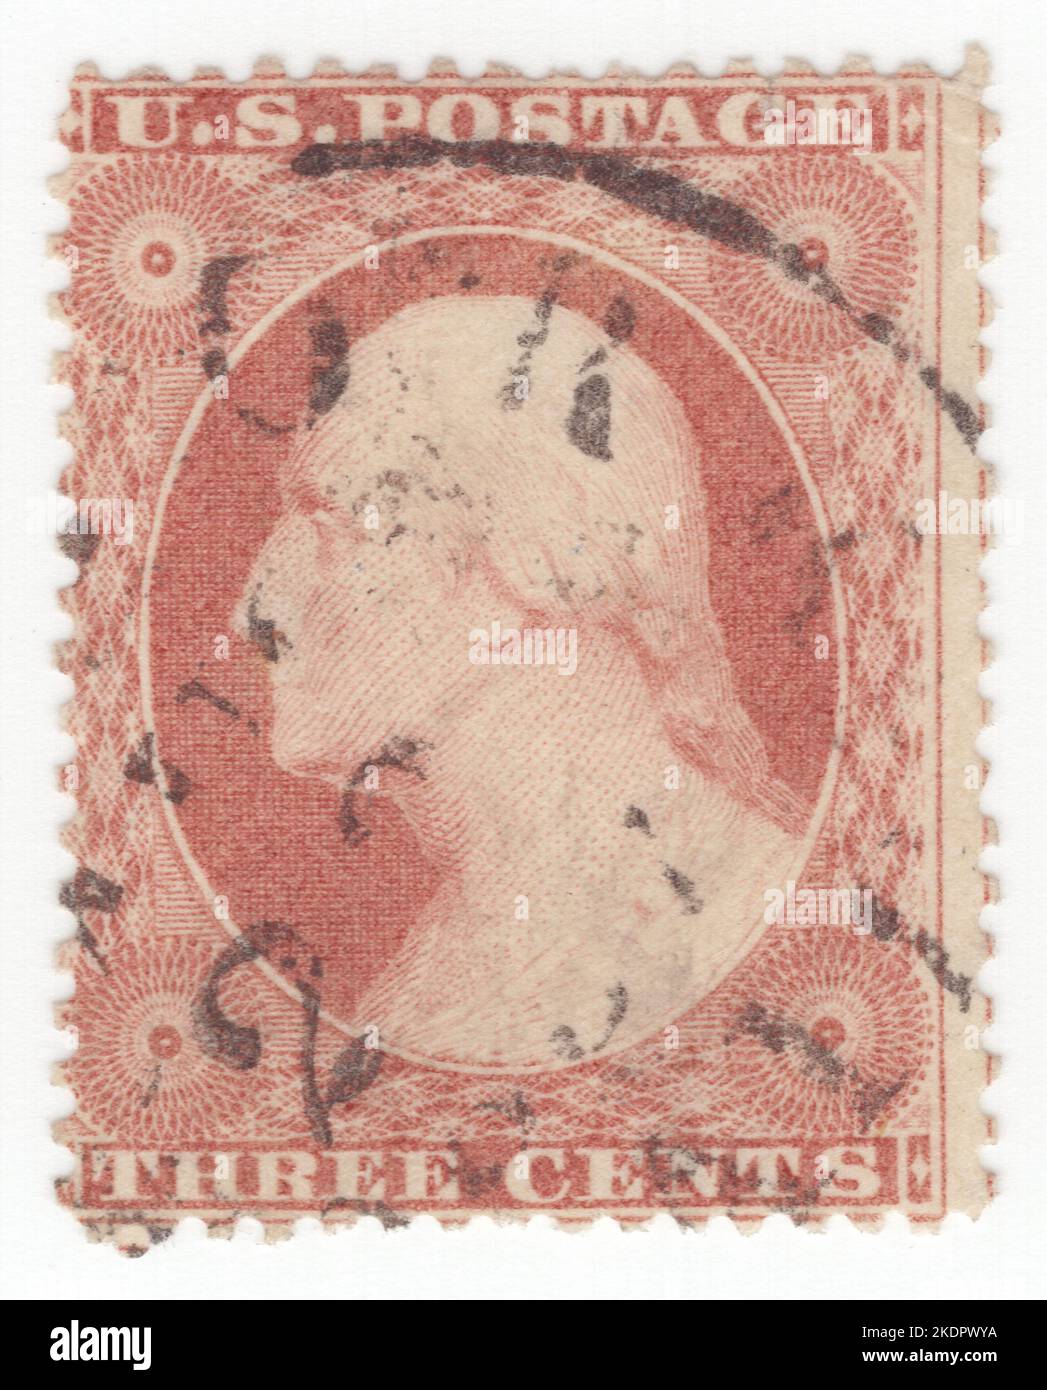 USA - 1857: An 3 cents rose postage stamp depicting portrait of George Washington. American military officer, statesman, and Founding Father who served as the first president of the United States from 1789 to 1797. Appointed by the Continental Congress as commander of the Continental Army, Washington led the Patriot forces to victory in the American Revolutionary War and served as the president of the Constitutional Convention of 1787, which created the Constitution of the United States and the American federal government. Washington has been called the 'Father of his Country' Stock Photo